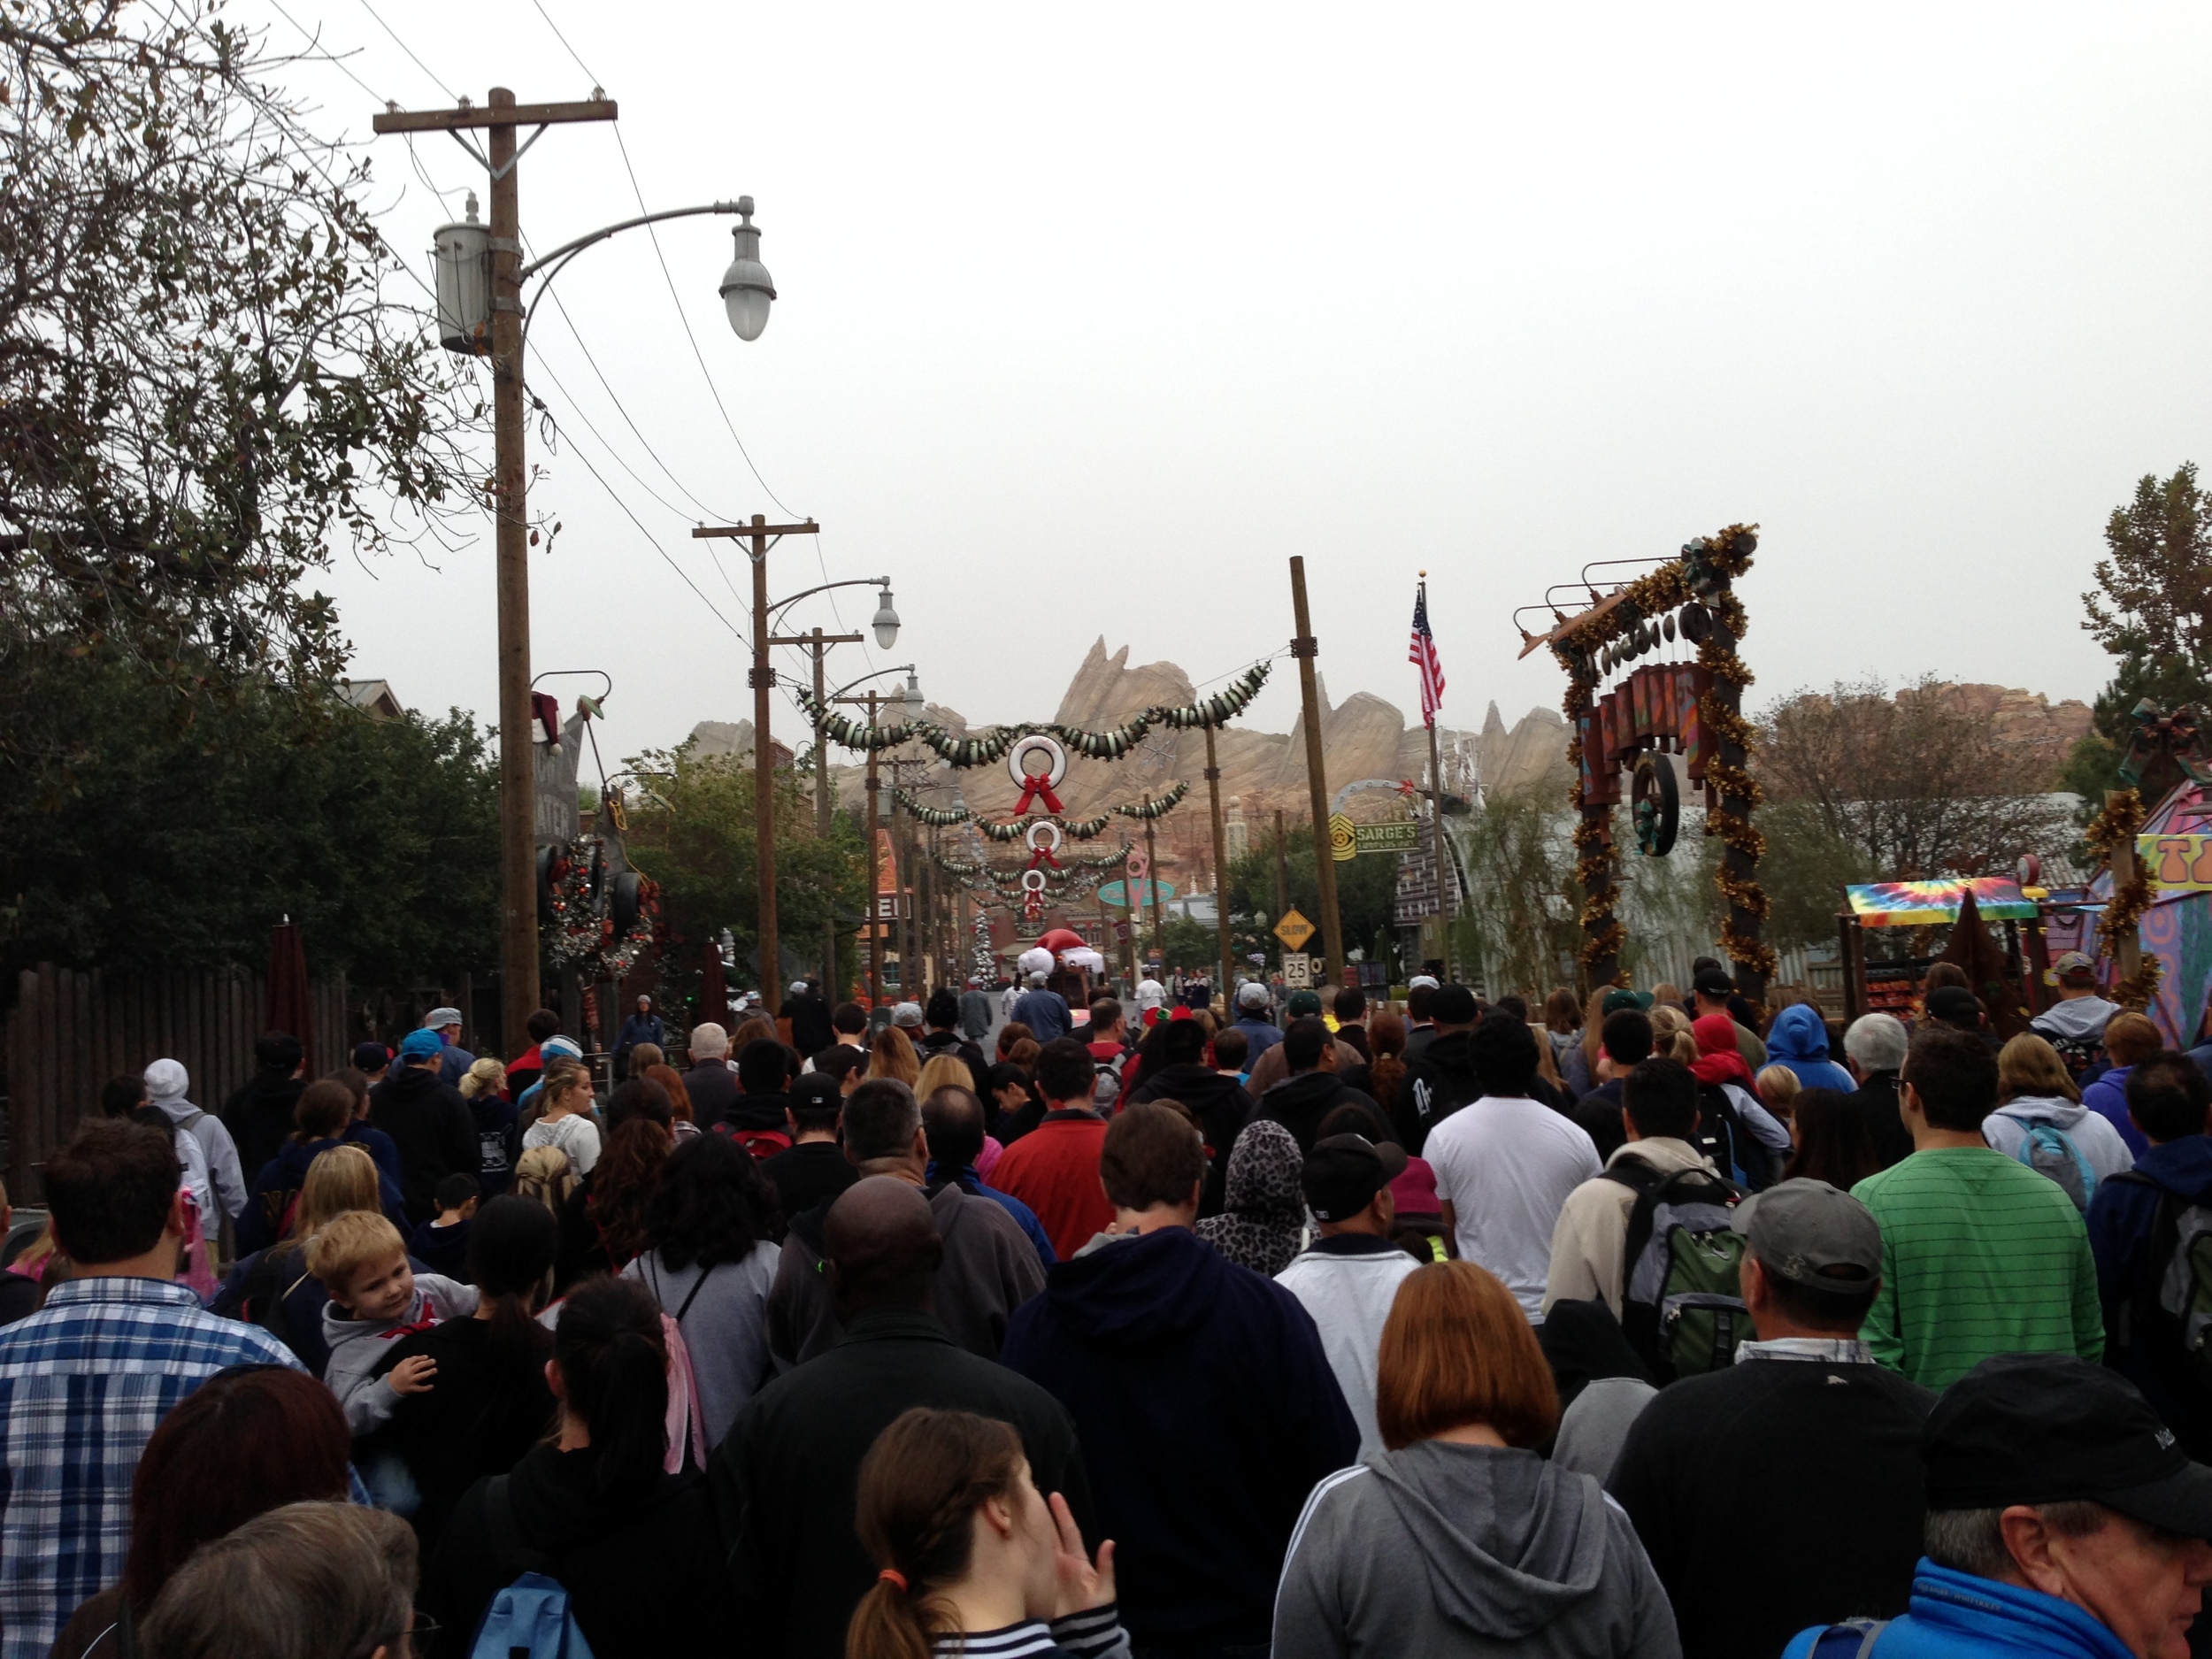  The mob of people making their way toward the Radiator Springs Racers. We were near the front of the rope drop and somehow got pushed back to the middle once we started moving. 